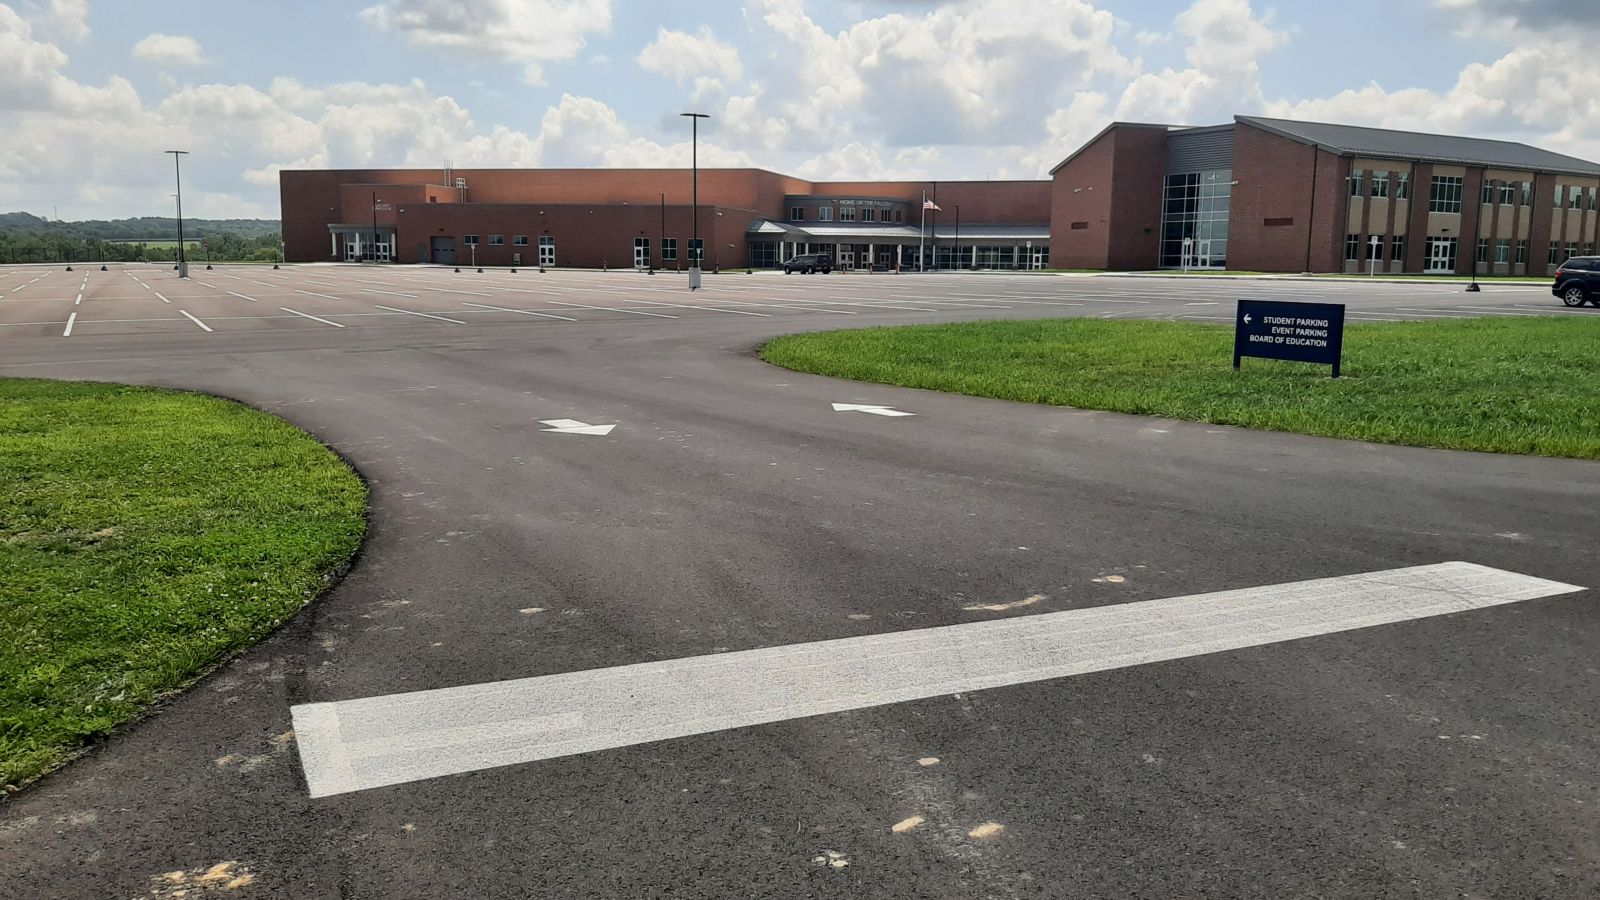 An image of a two-way entrance and exit at the parking lot with correlating signage and painted lines on the blacktop. 